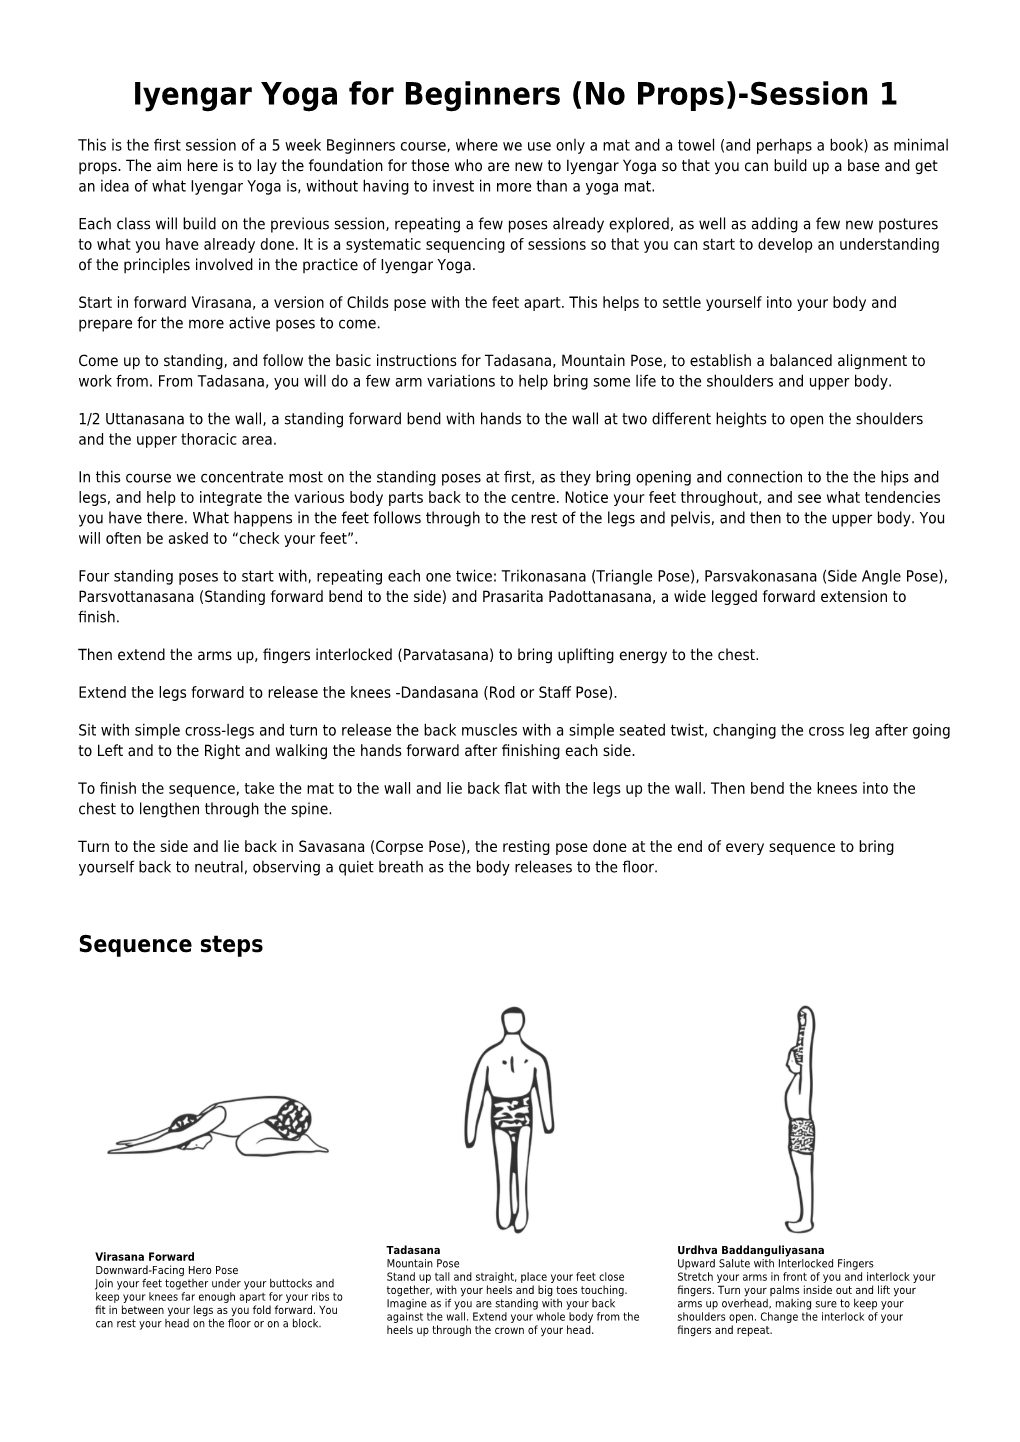 Iyengar Yoga for Beginners (No Props)-Session 1